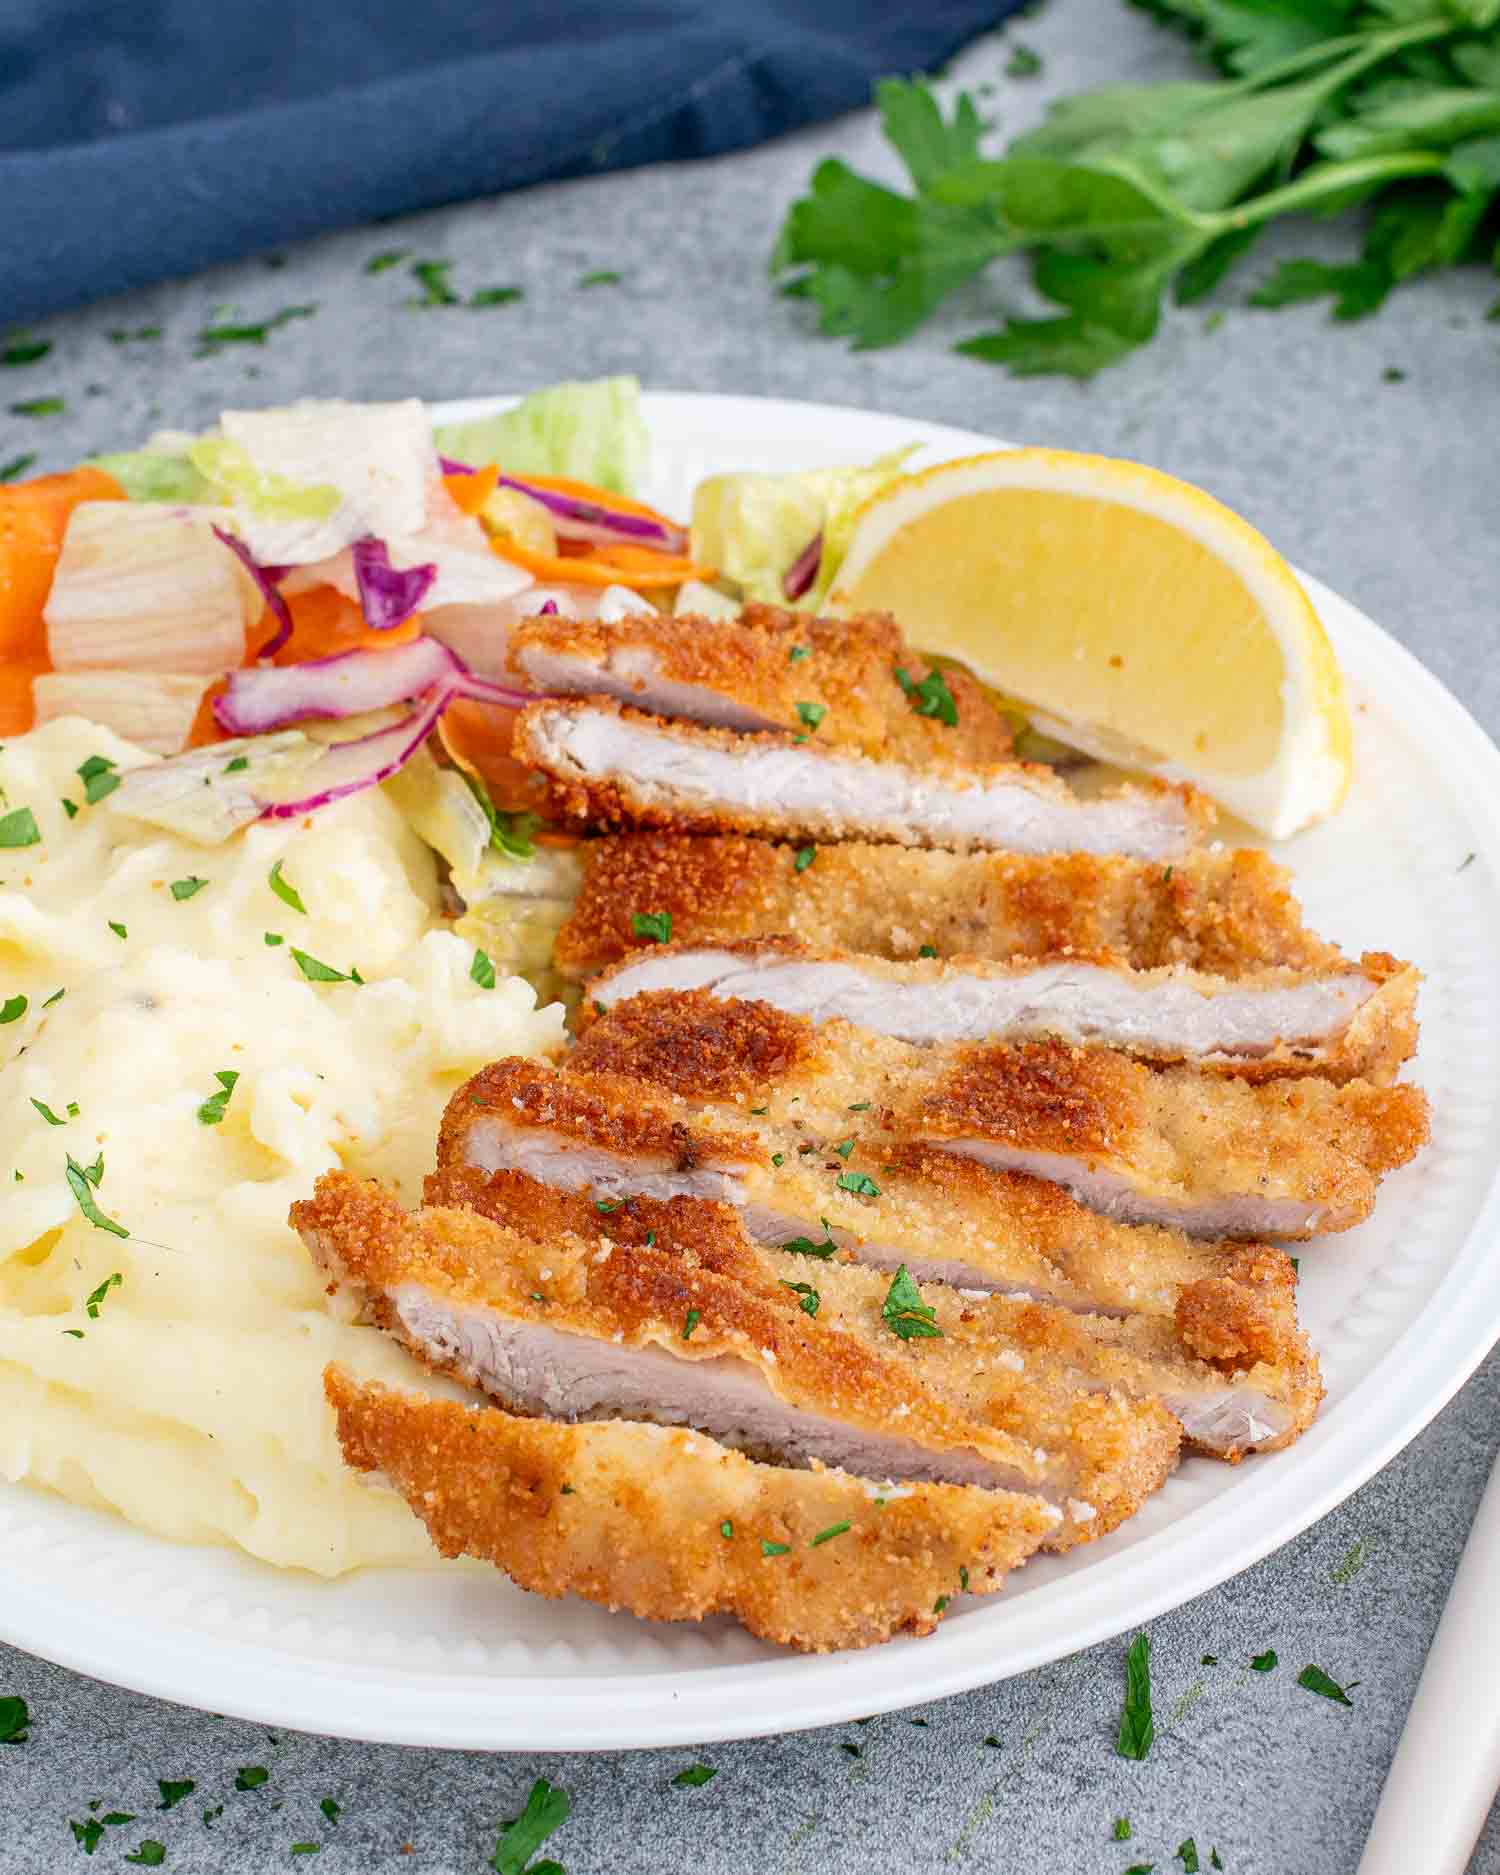 pork schnitzel with mashed potatoes and a tossed salad on a white plate.